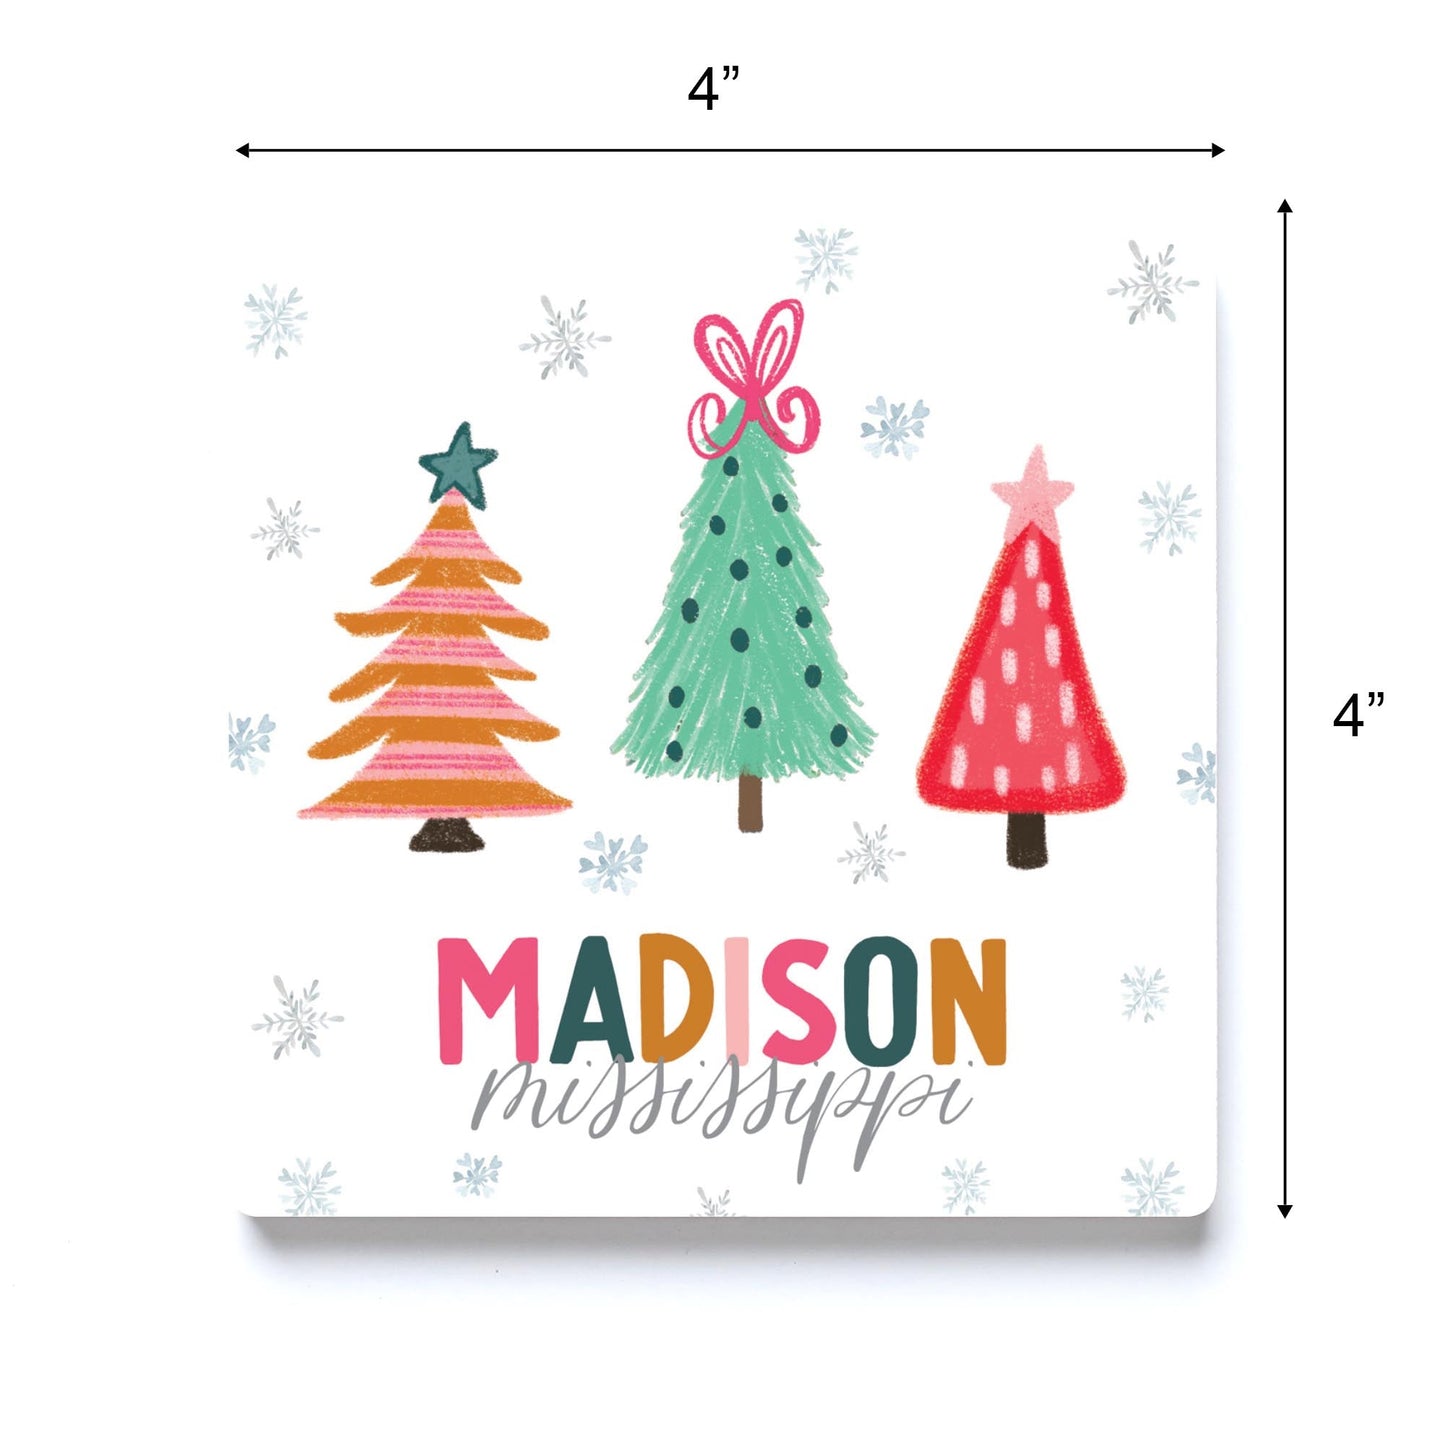 Clairmont & Co Whimsy Bright Madison MS | 4x4